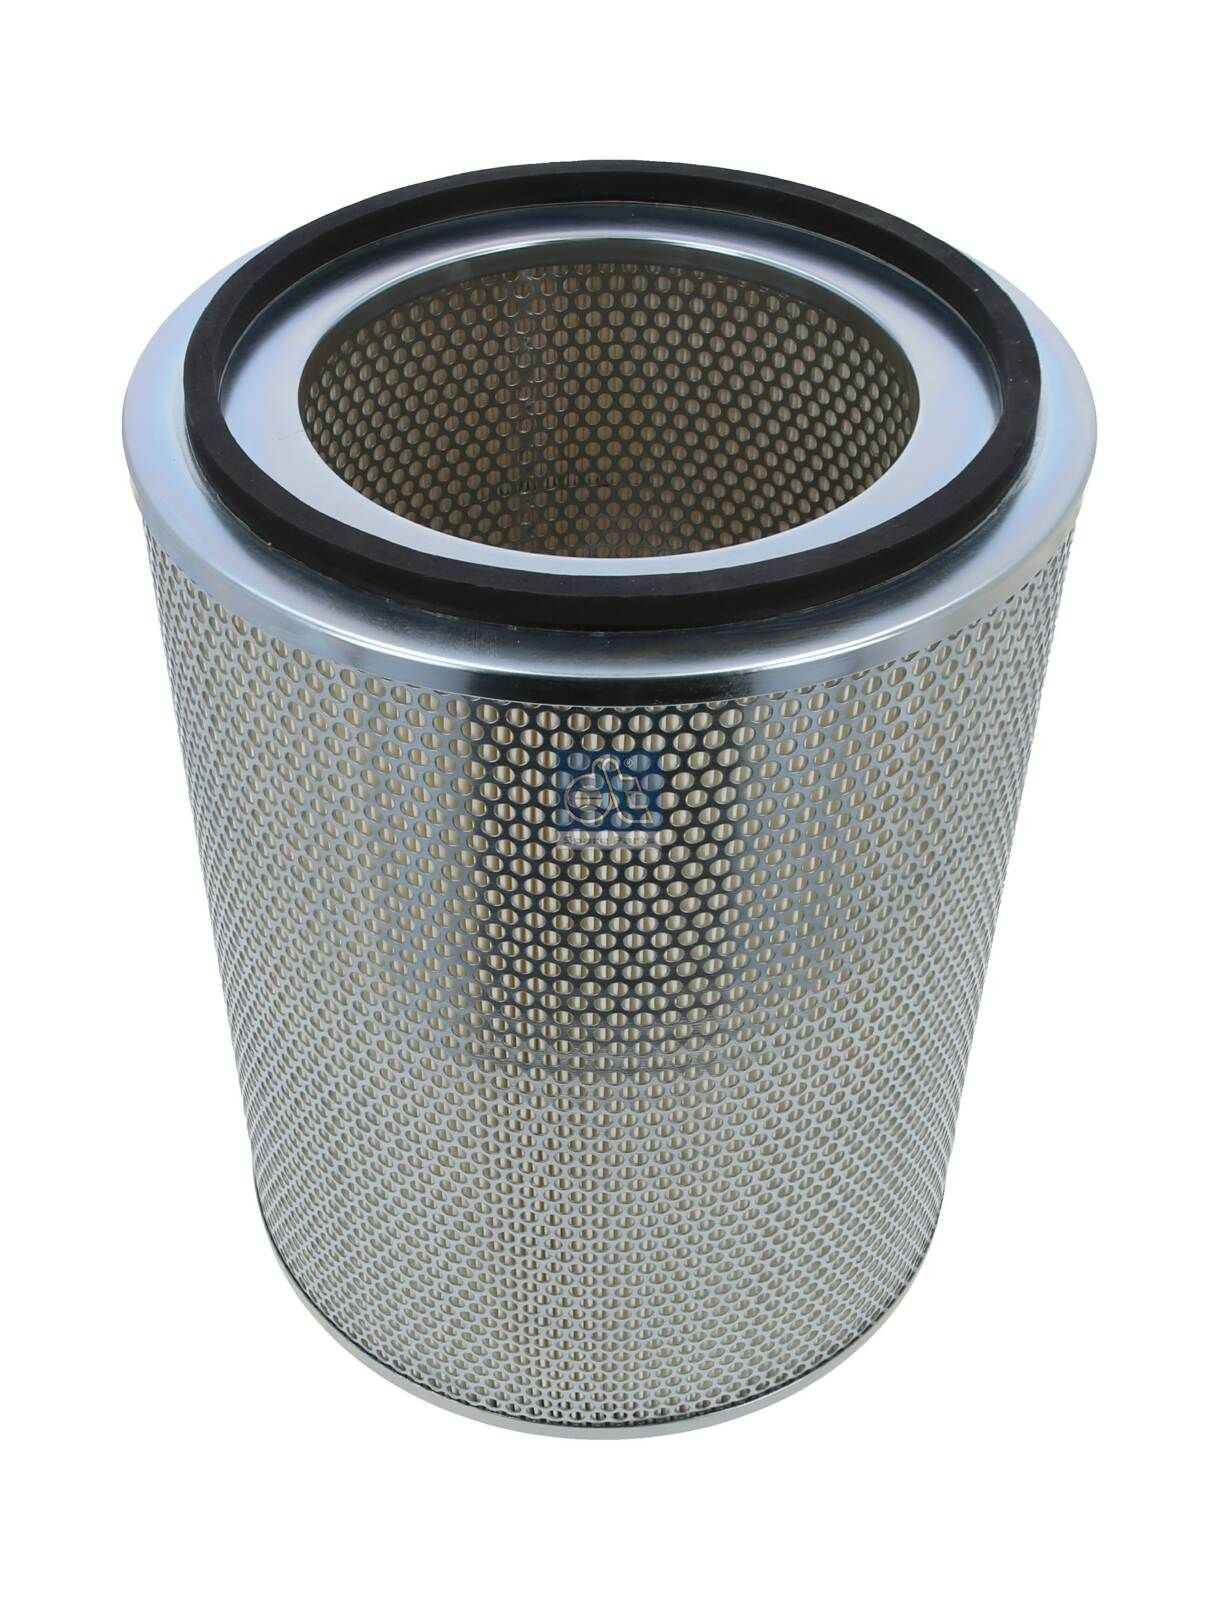 C 31 1256 DT Spare Parts 398mm, 308mm, Filter Insert Height: 398mm Engine air filter 6.25001 buy